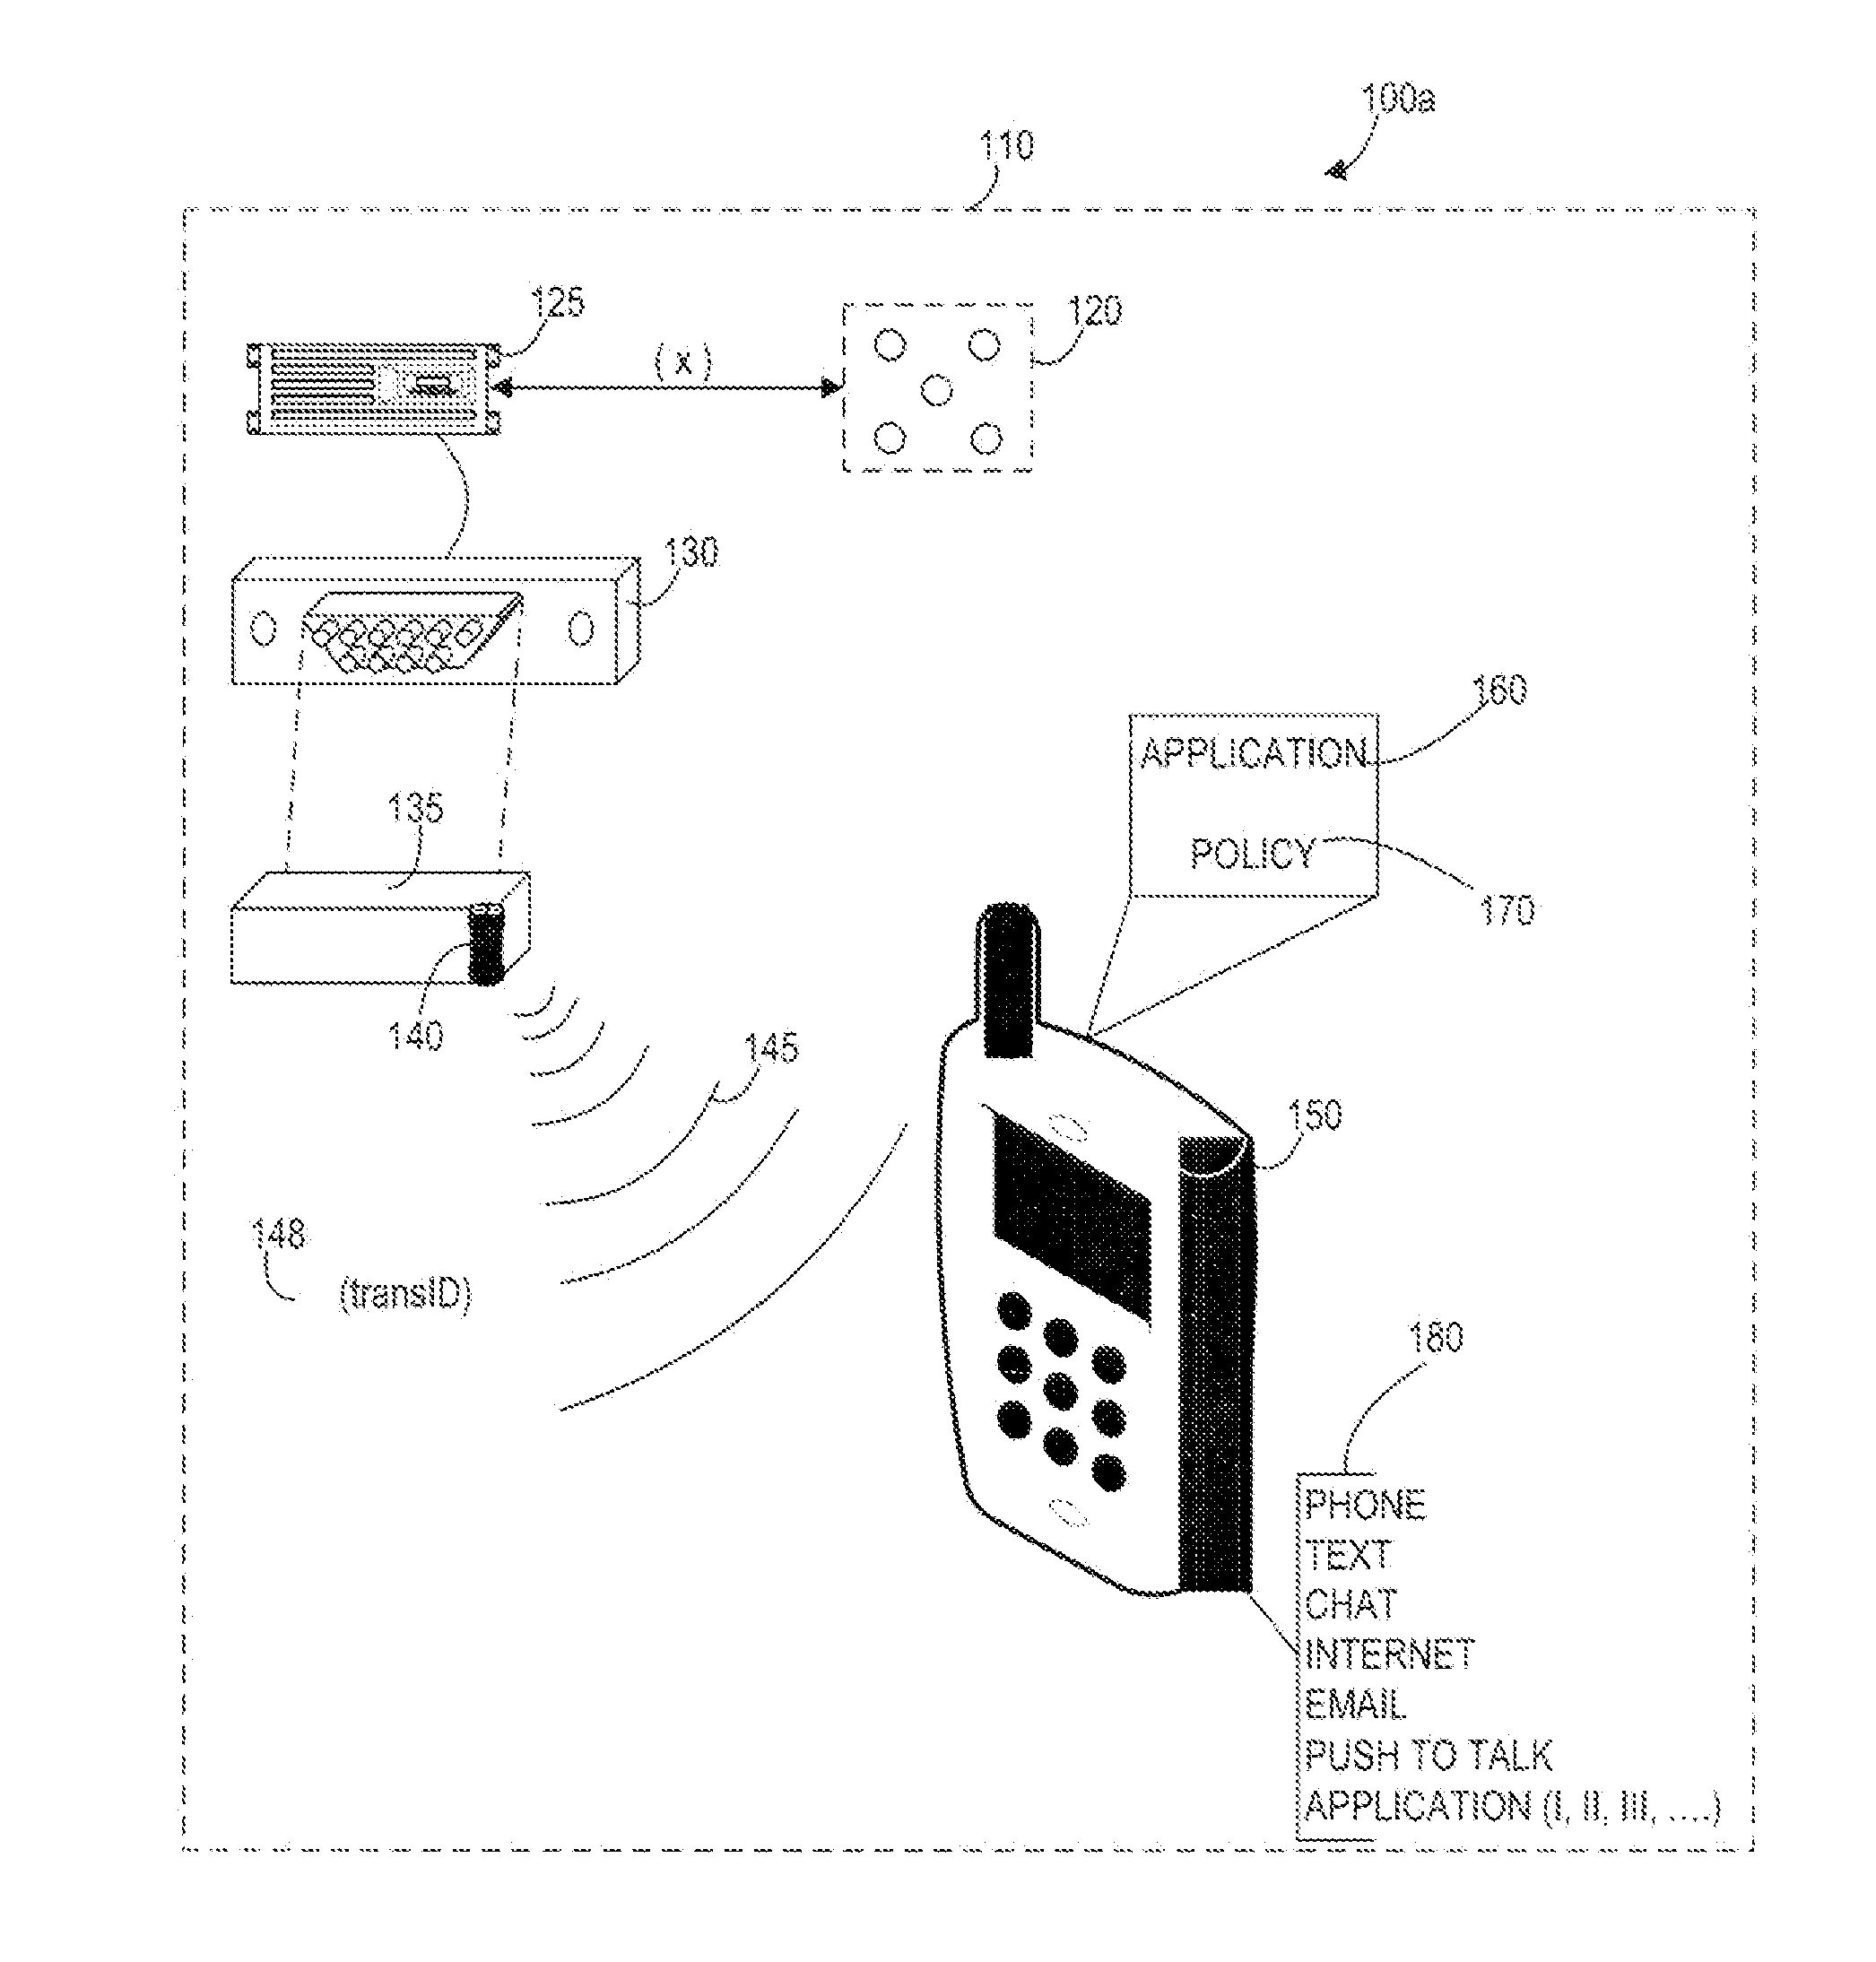 Systems, Methods, And Devices For Policy-Based Control and Monitoring of Use of Mobile Devices By Vehicle Operators